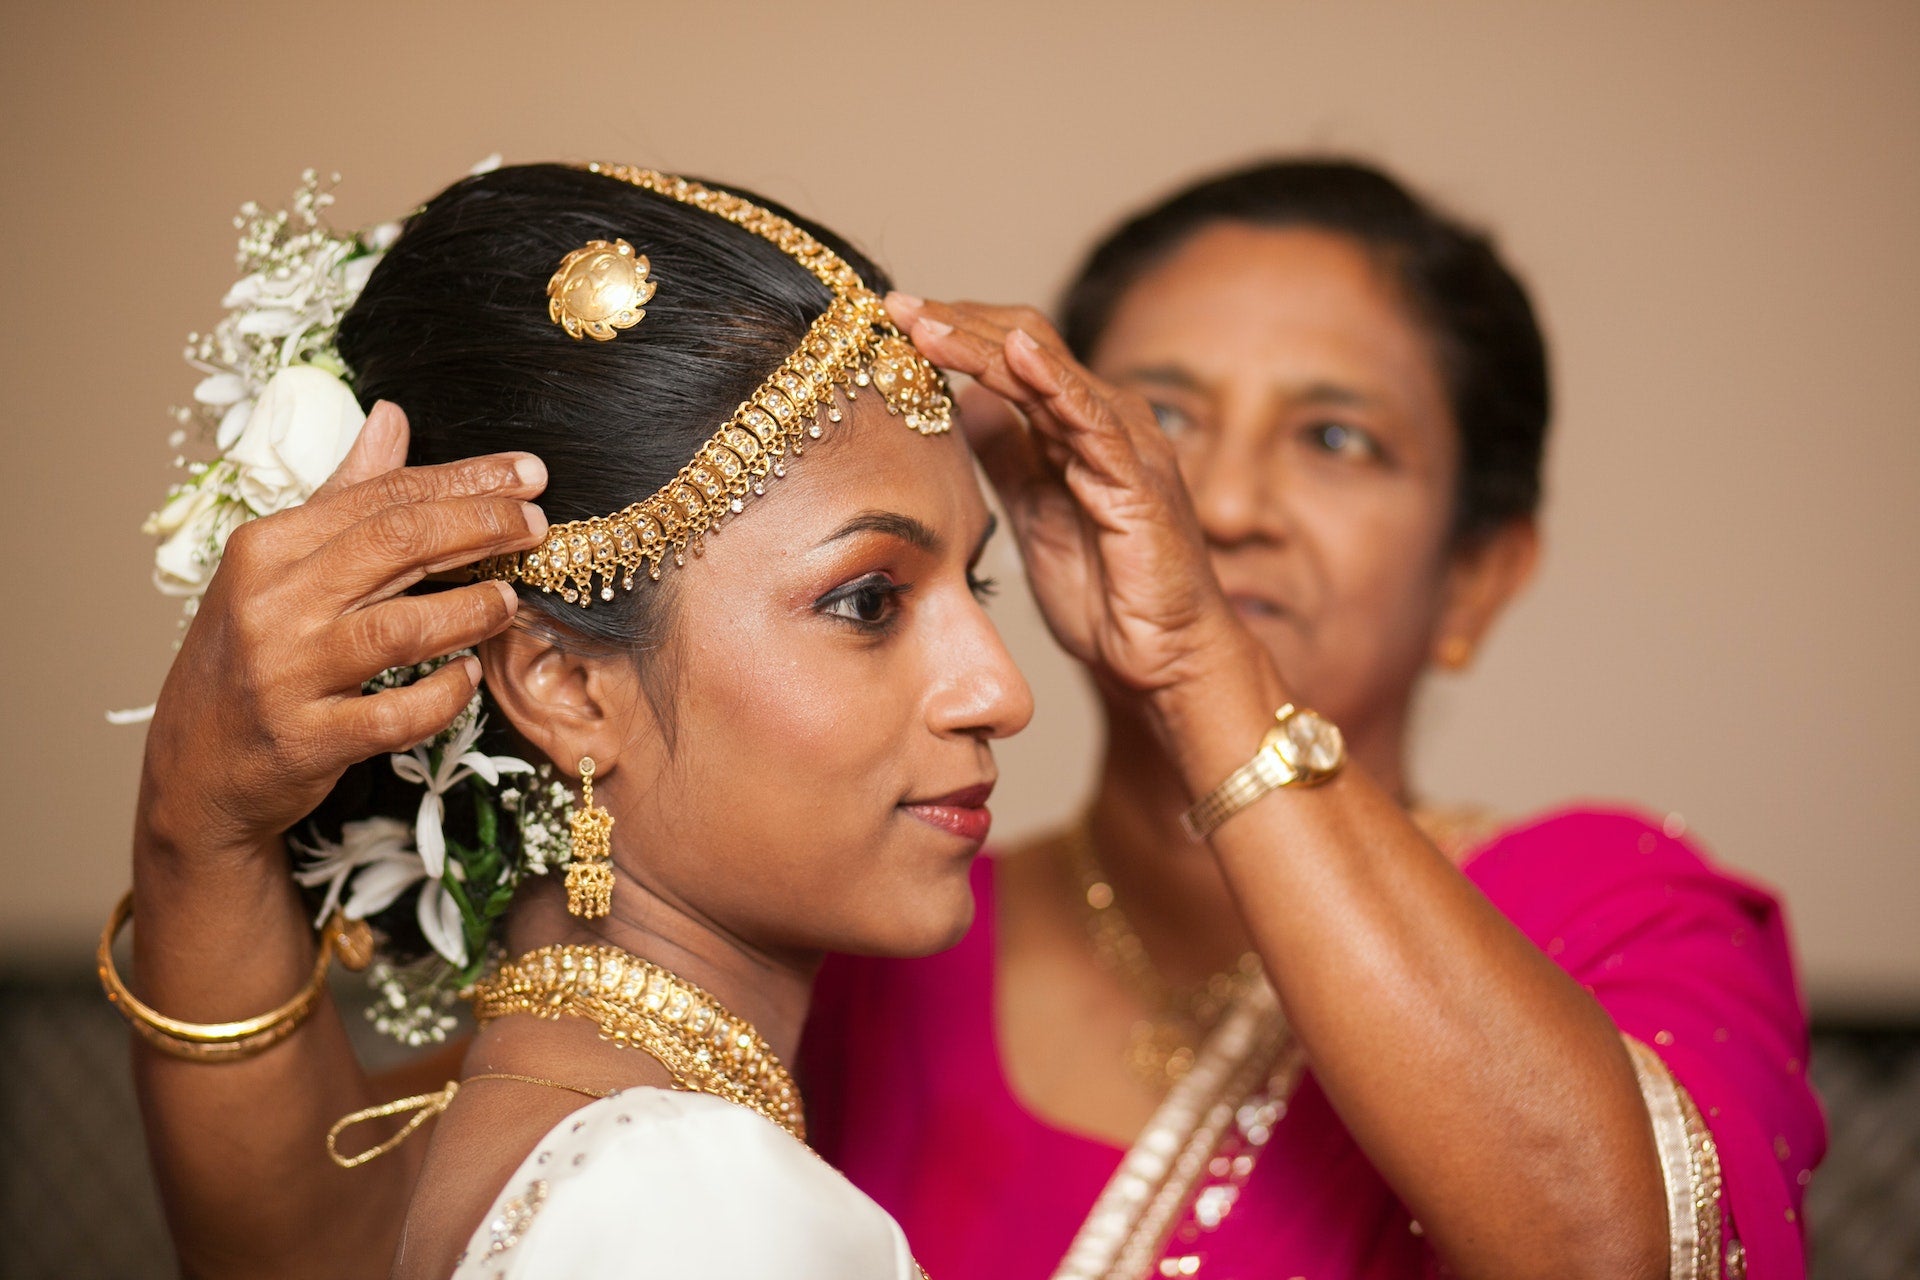 A trousseau service to keep your bridal make-up in check